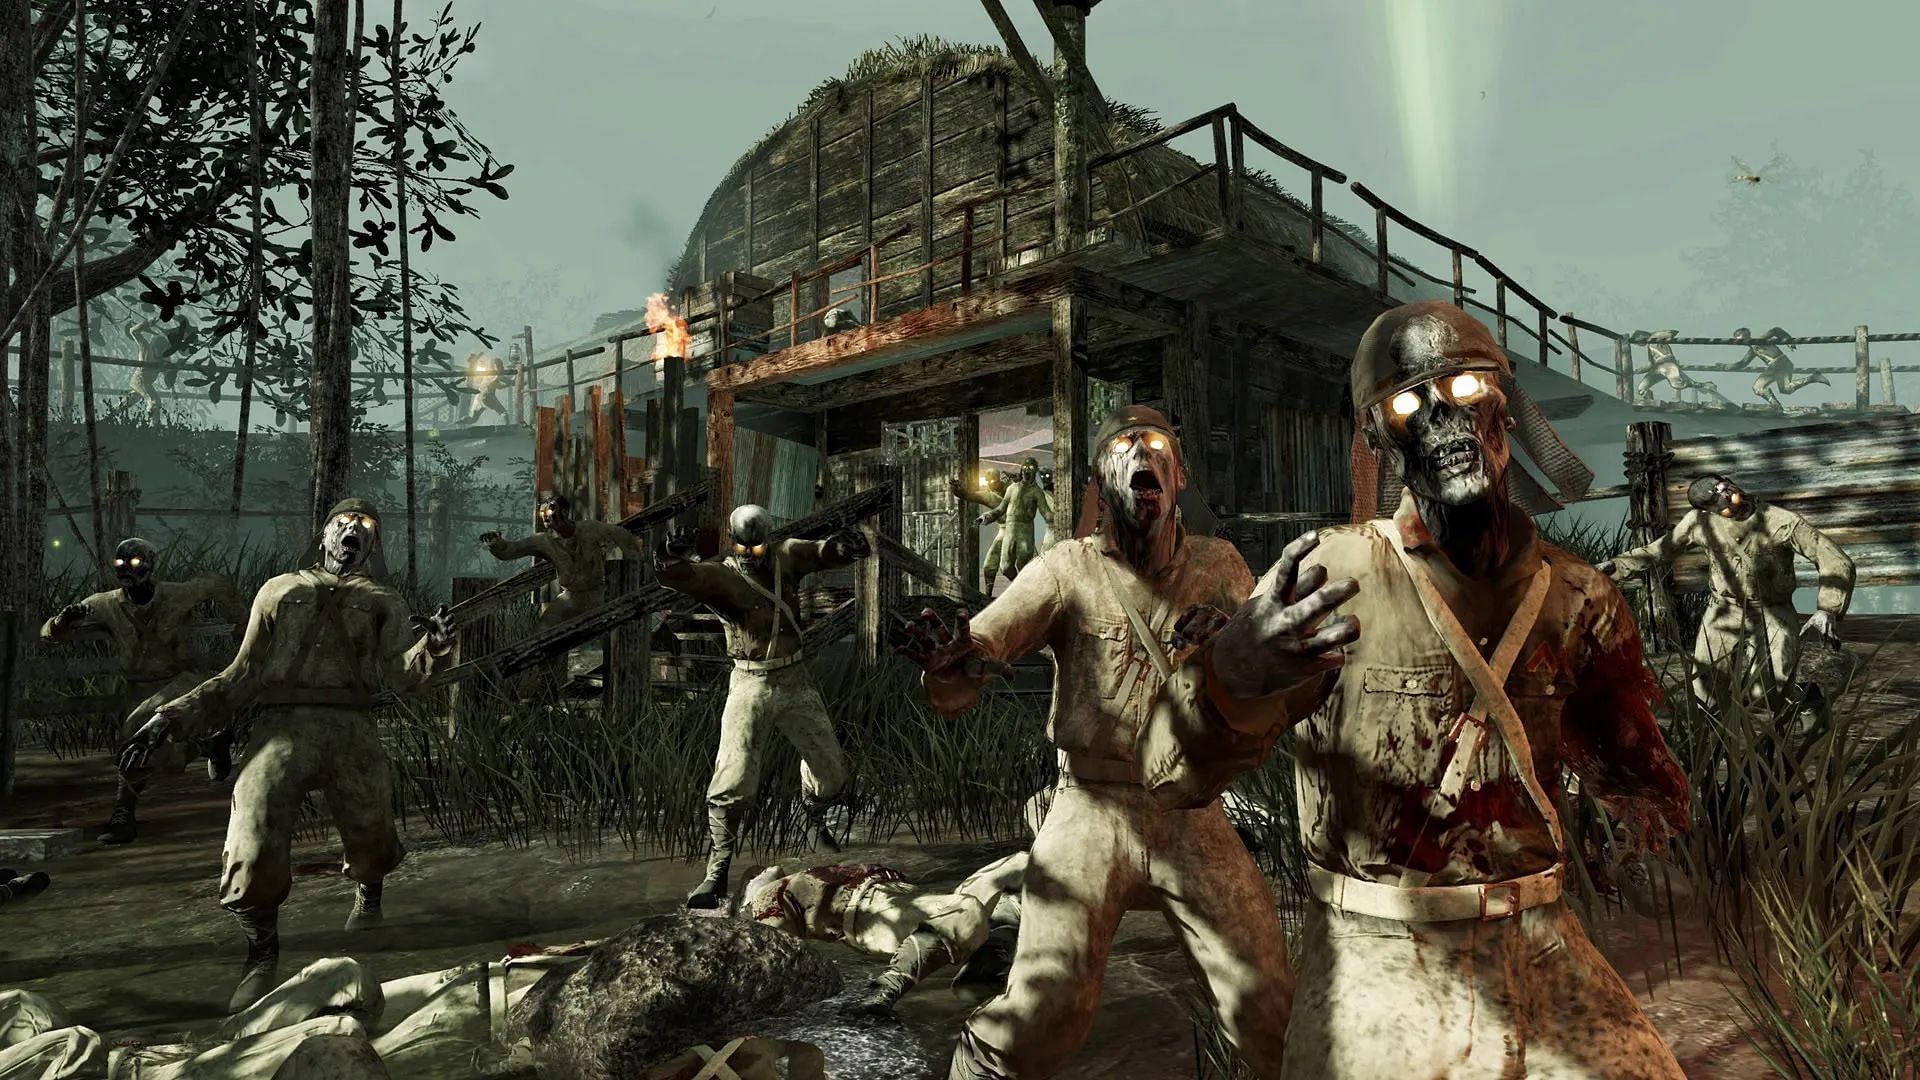 Call of Duty promo event teases Zombies